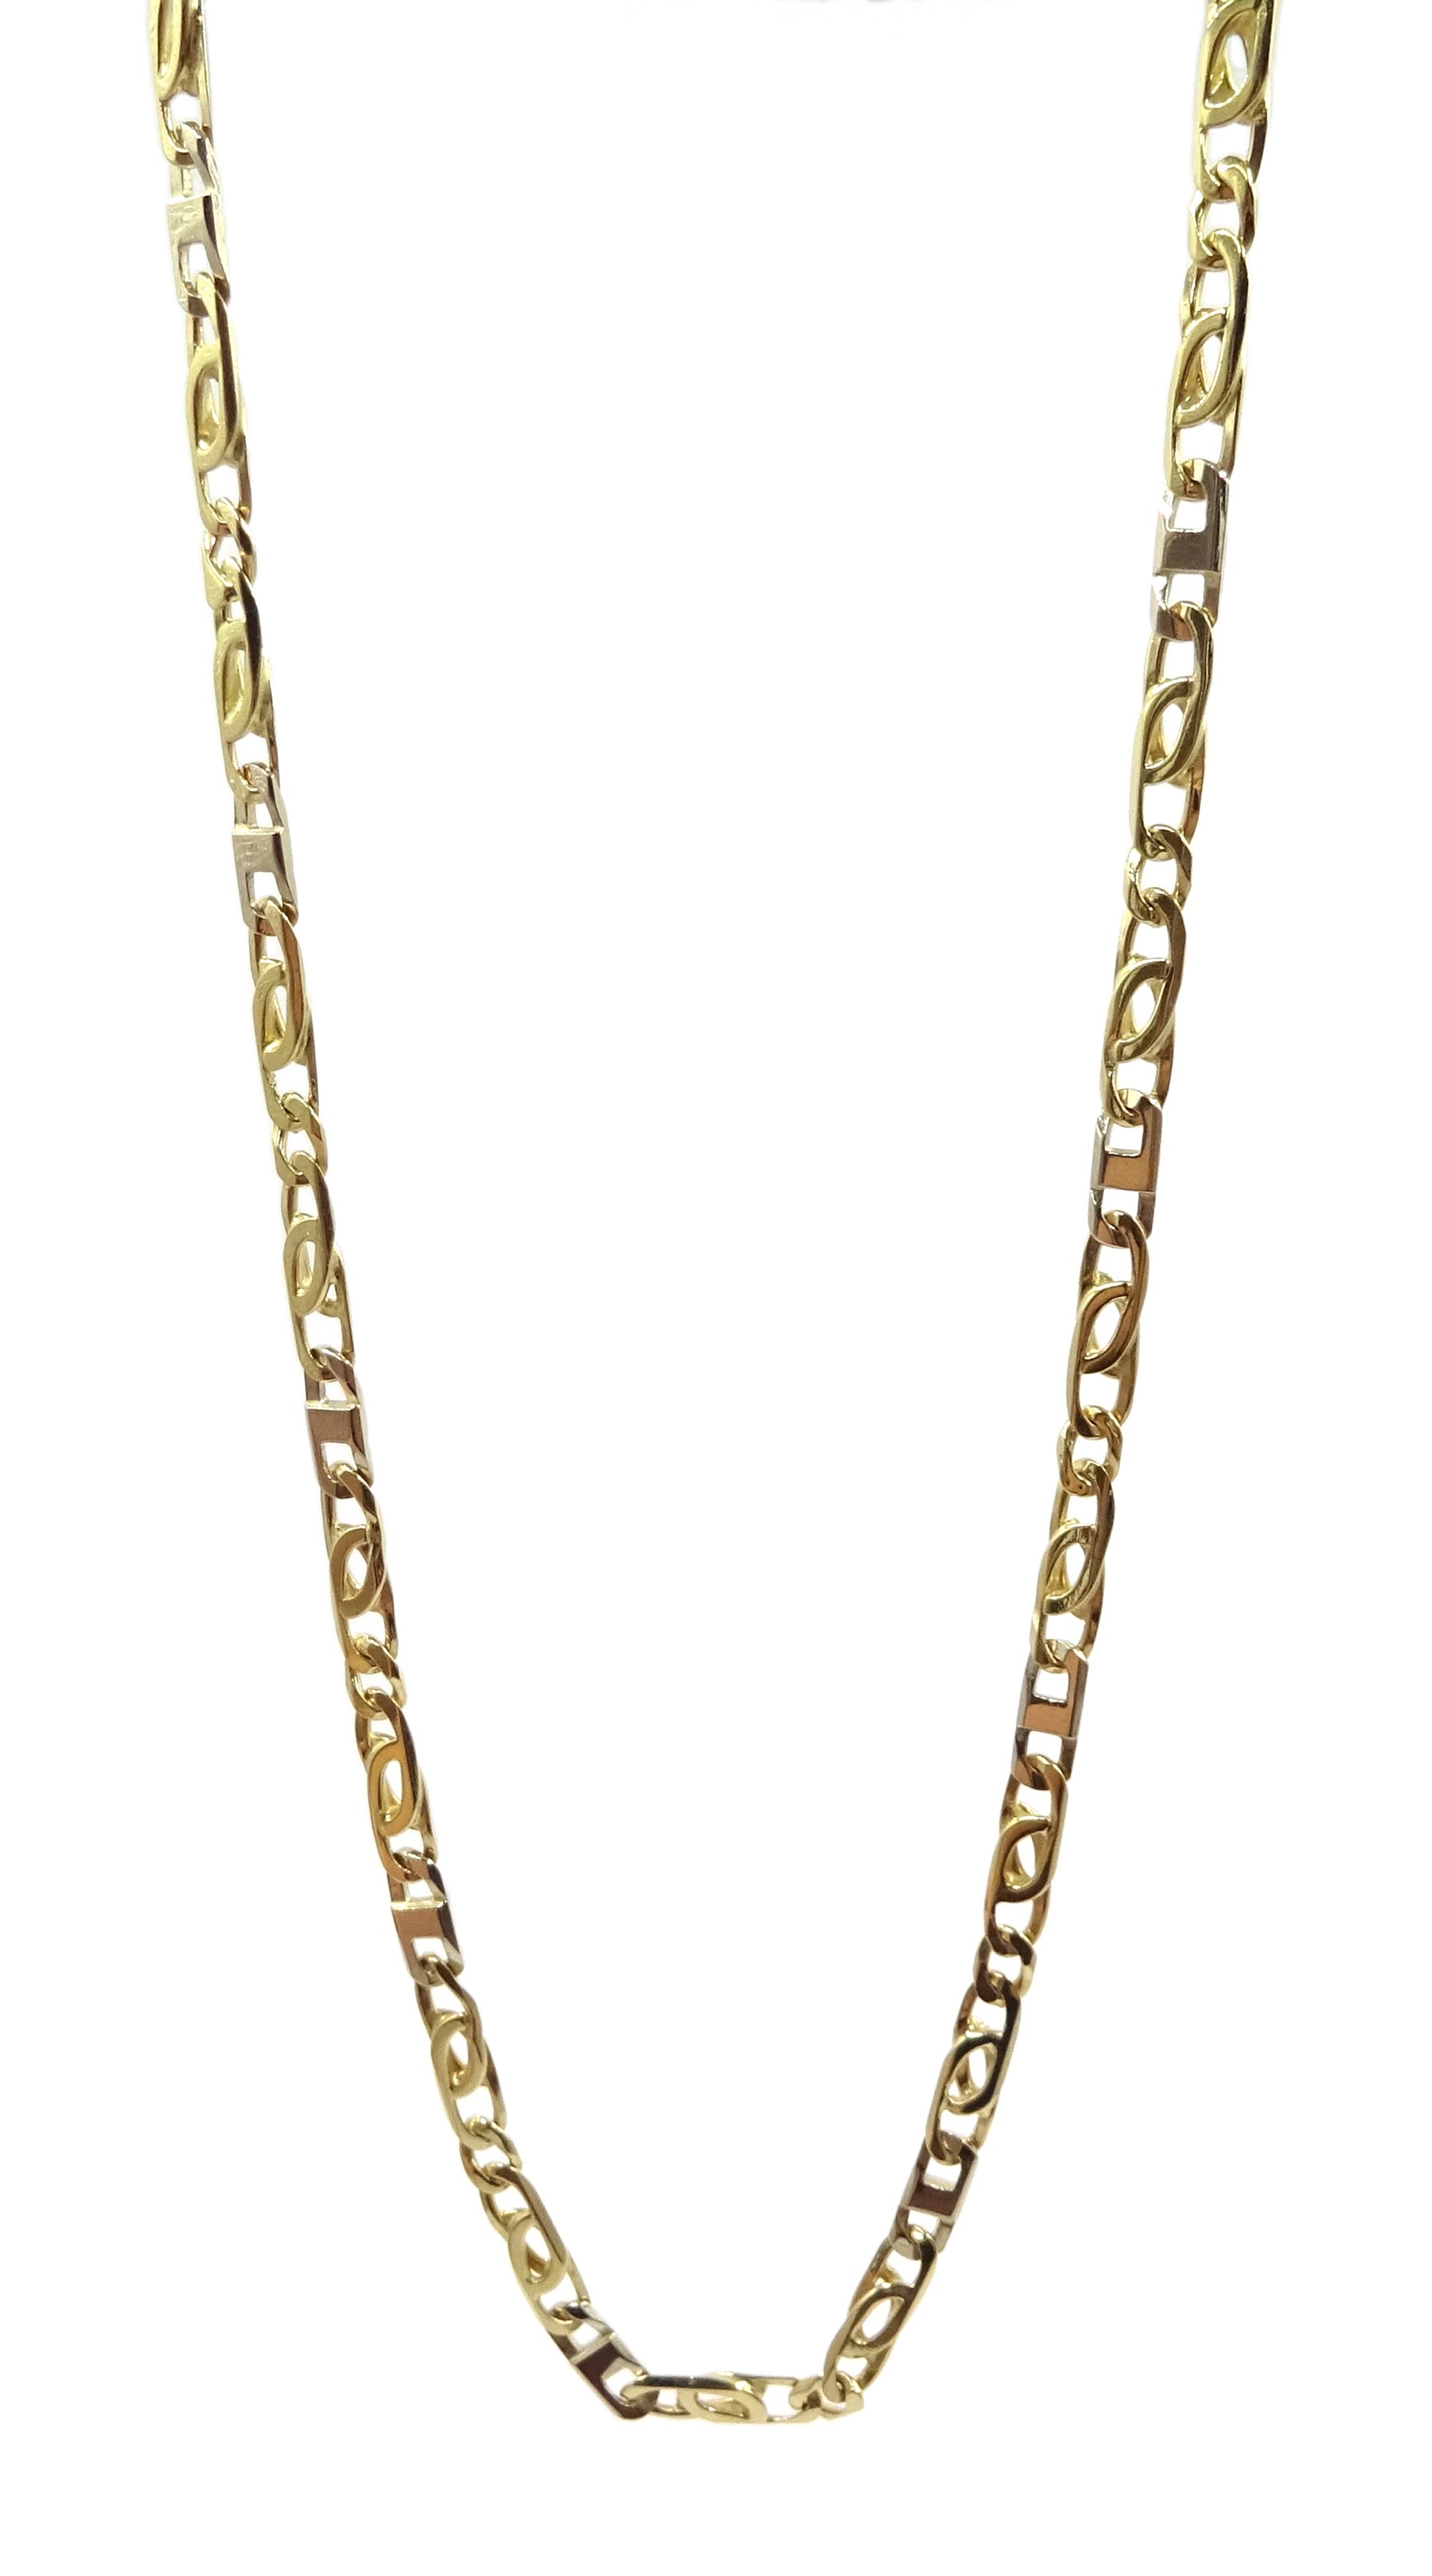 14ct gold flattened fancy link chain necklace, stamped 585, approx 23